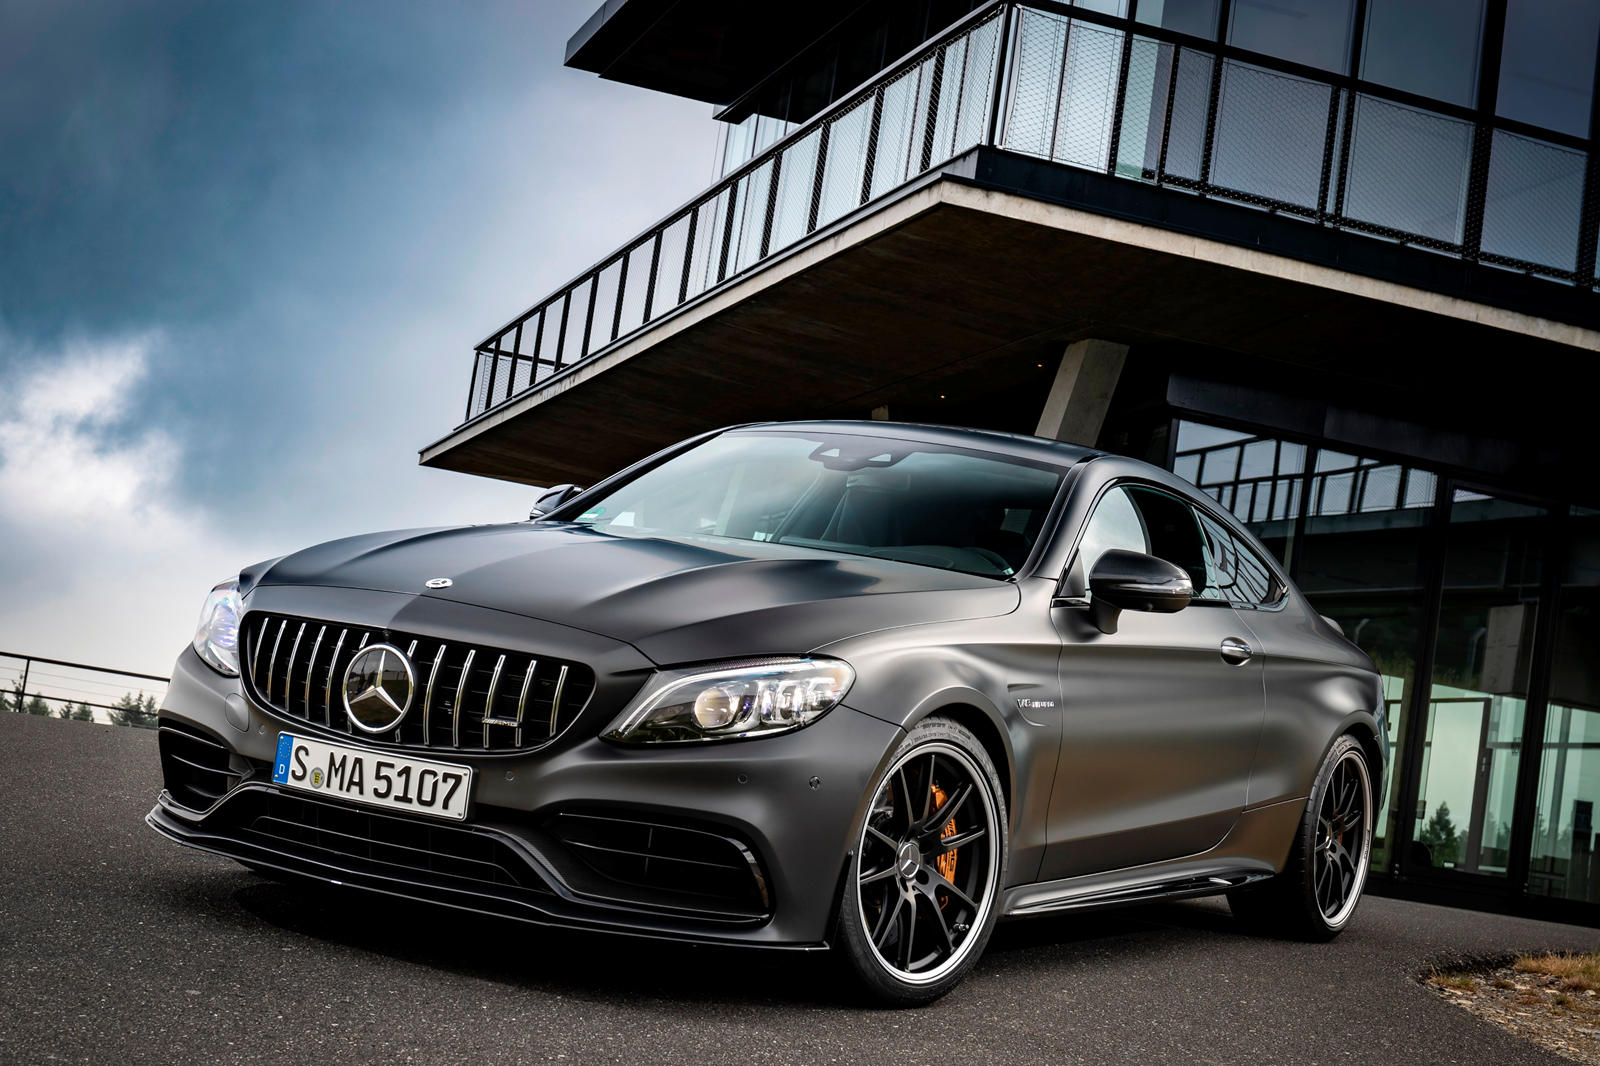 Used Mercedes-Benz AMG C63 Coupe With a 6.3-liter engine for sale: best pri...